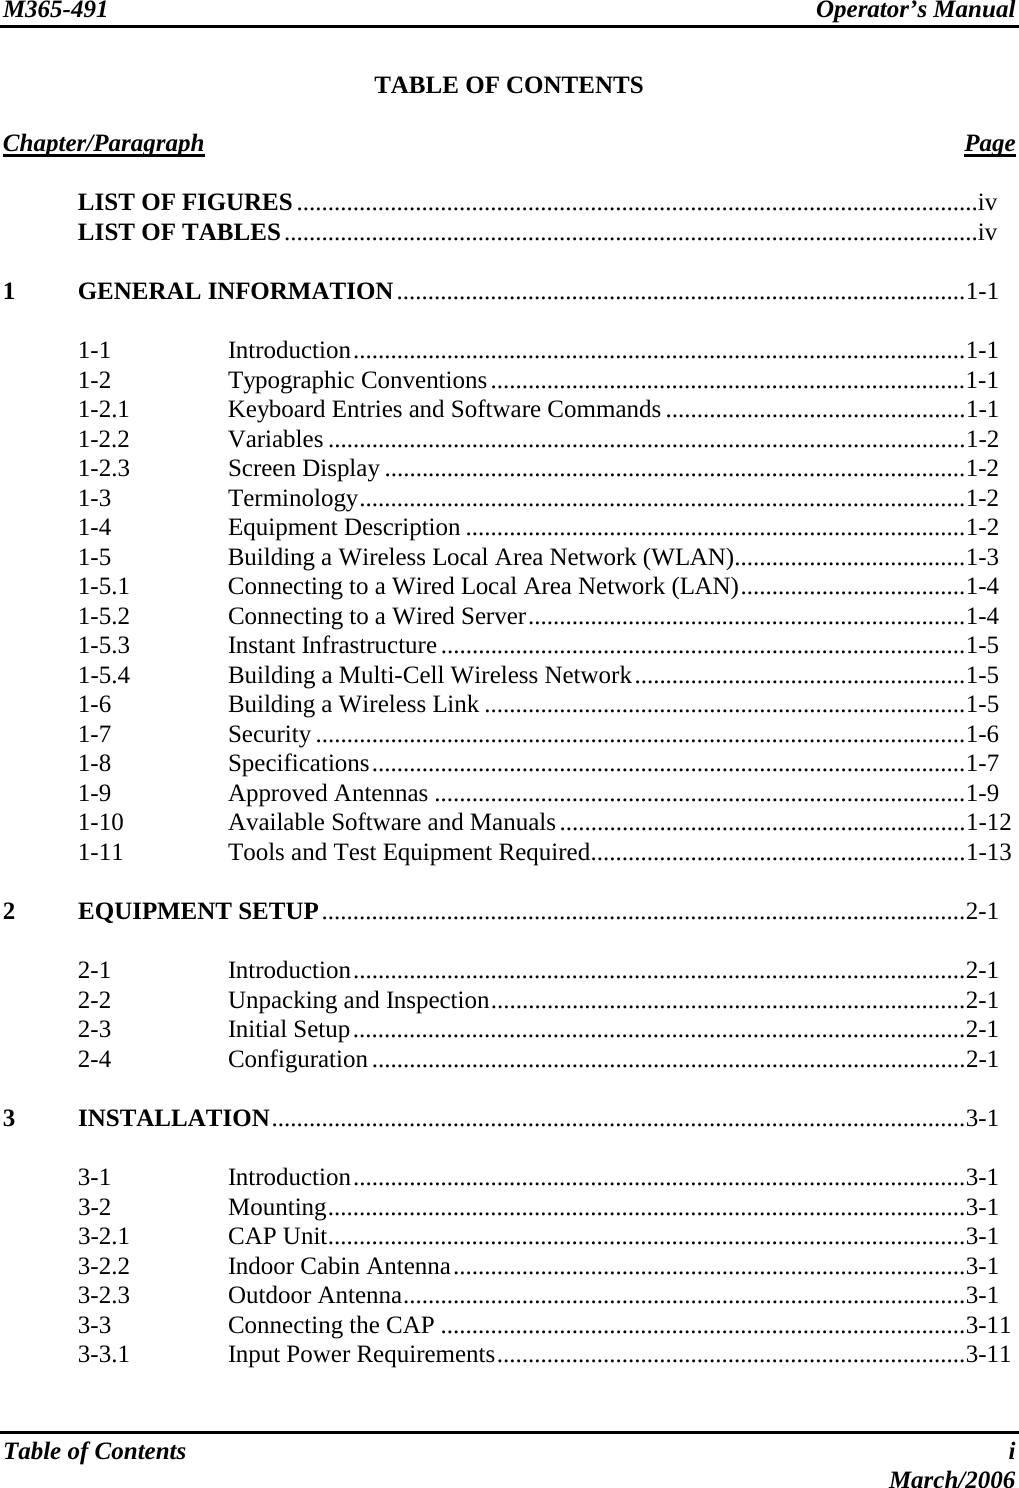 M365-491 Operator’s Manual   Table of Contents  i  March/2006 TABLE OF CONTENTS  Chapter/Paragraph Page   LIST OF FIGURES.............................................................................................................iv   LIST OF TABLES...............................................................................................................iv  1 GENERAL INFORMATION...........................................................................................1-1   1-1  Introduction..................................................................................................1-1  1-2  Typographic Conventions............................................................................1-1   1-2.1  Keyboard Entries and Software Commands ................................................1-1  1-2.2  Variables ......................................................................................................1-2  1-2.3  Screen Display .............................................................................................1-2  1-3  Terminology.................................................................................................1-2  1-4  Equipment Description ................................................................................1-2   1-5  Building a Wireless Local Area Network (WLAN).....................................1-3   1-5.1  Connecting to a Wired Local Area Network (LAN)....................................1-4  1-5.2  Connecting to a Wired Server......................................................................1-4  1-5.3  Instant Infrastructure....................................................................................1-5   1-5.4  Building a Multi-Cell Wireless Network.....................................................1-5   1-6  Building a Wireless Link .............................................................................1-5  1-7  Security ........................................................................................................1-6  1-8  Specifications...............................................................................................1-7  1-9  Approved Antennas .....................................................................................1-9  1-10  Available Software and Manuals.................................................................1-12   1-11  Tools and Test Equipment Required............................................................1-13  2 EQUIPMENT SETUP.......................................................................................................2-1   2-1  Introduction..................................................................................................2-1   2-2  Unpacking and Inspection............................................................................2-1  2-3  Initial Setup..................................................................................................2-1  2-4  Configuration...............................................................................................2-1  3 INSTALLATION...............................................................................................................3-1   3-1  Introduction..................................................................................................3-1  3-2  Mounting......................................................................................................3-1  3-2.1  CAP Unit......................................................................................................3-1   3-2.2  Indoor Cabin Antenna..................................................................................3-1  3-2.3  Outdoor Antenna..........................................................................................3-1   3-3  Connecting the CAP ....................................................................................3-11   3-3.1  Input Power Requirements...........................................................................3-11  